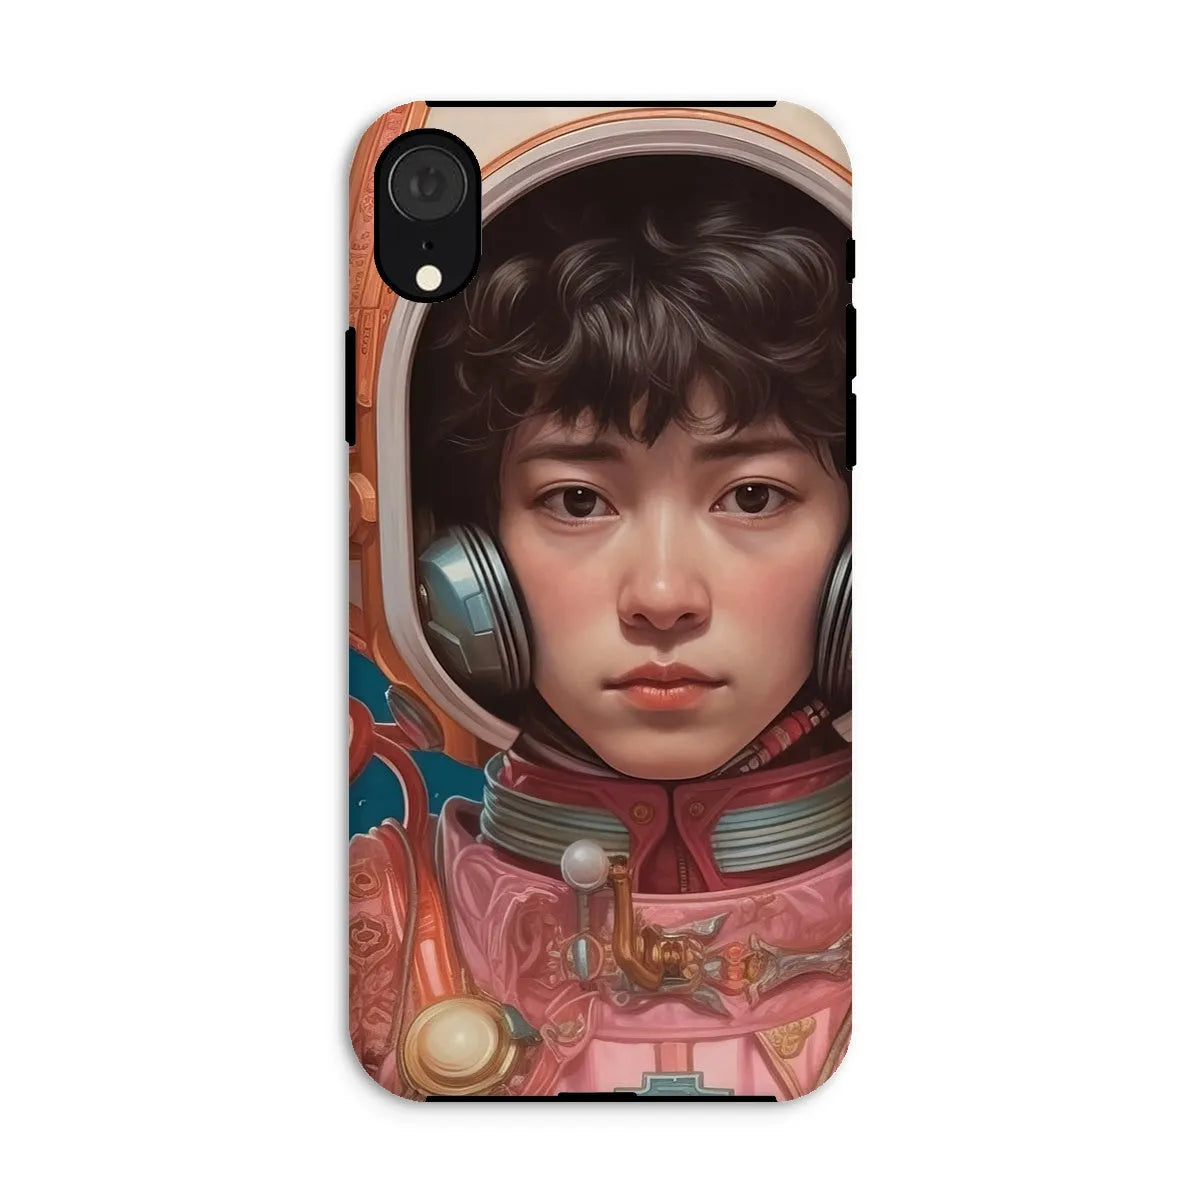 Kaito The Gay Astronaut - Lgbtq Art Phone Case - Iphone Xr / Matte - Mobile Phone Cases - Aesthetic Art